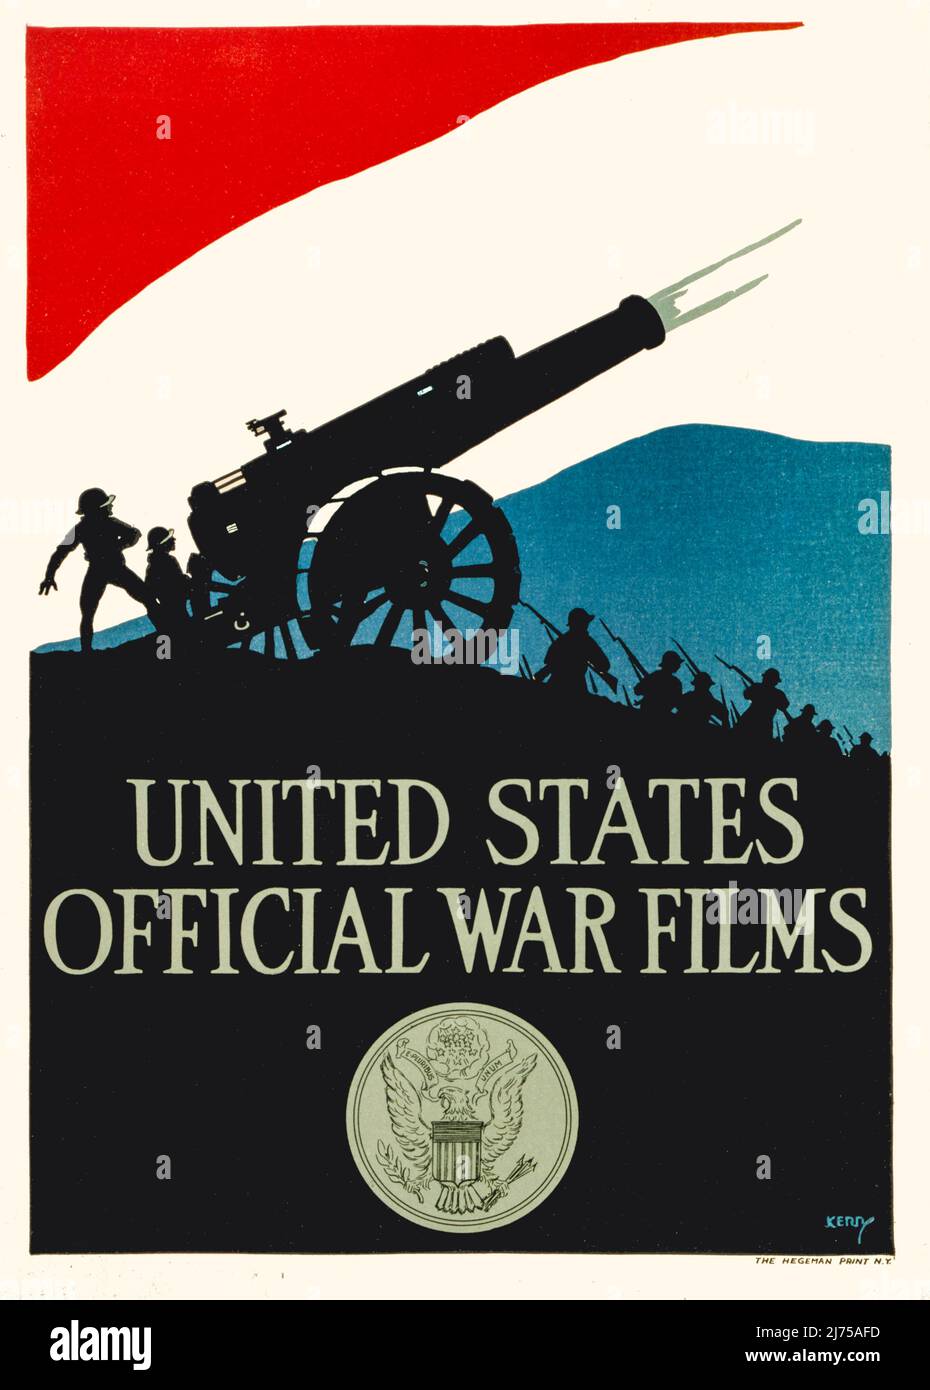 An early 20th century American advertising poster from World War One, 1914-1918, for official war films. The illustration shows silhouettes of soldiers, firing a cannon against a red, white, and blue sky, with the United States seal below. The artist is unknown. Stock Photo